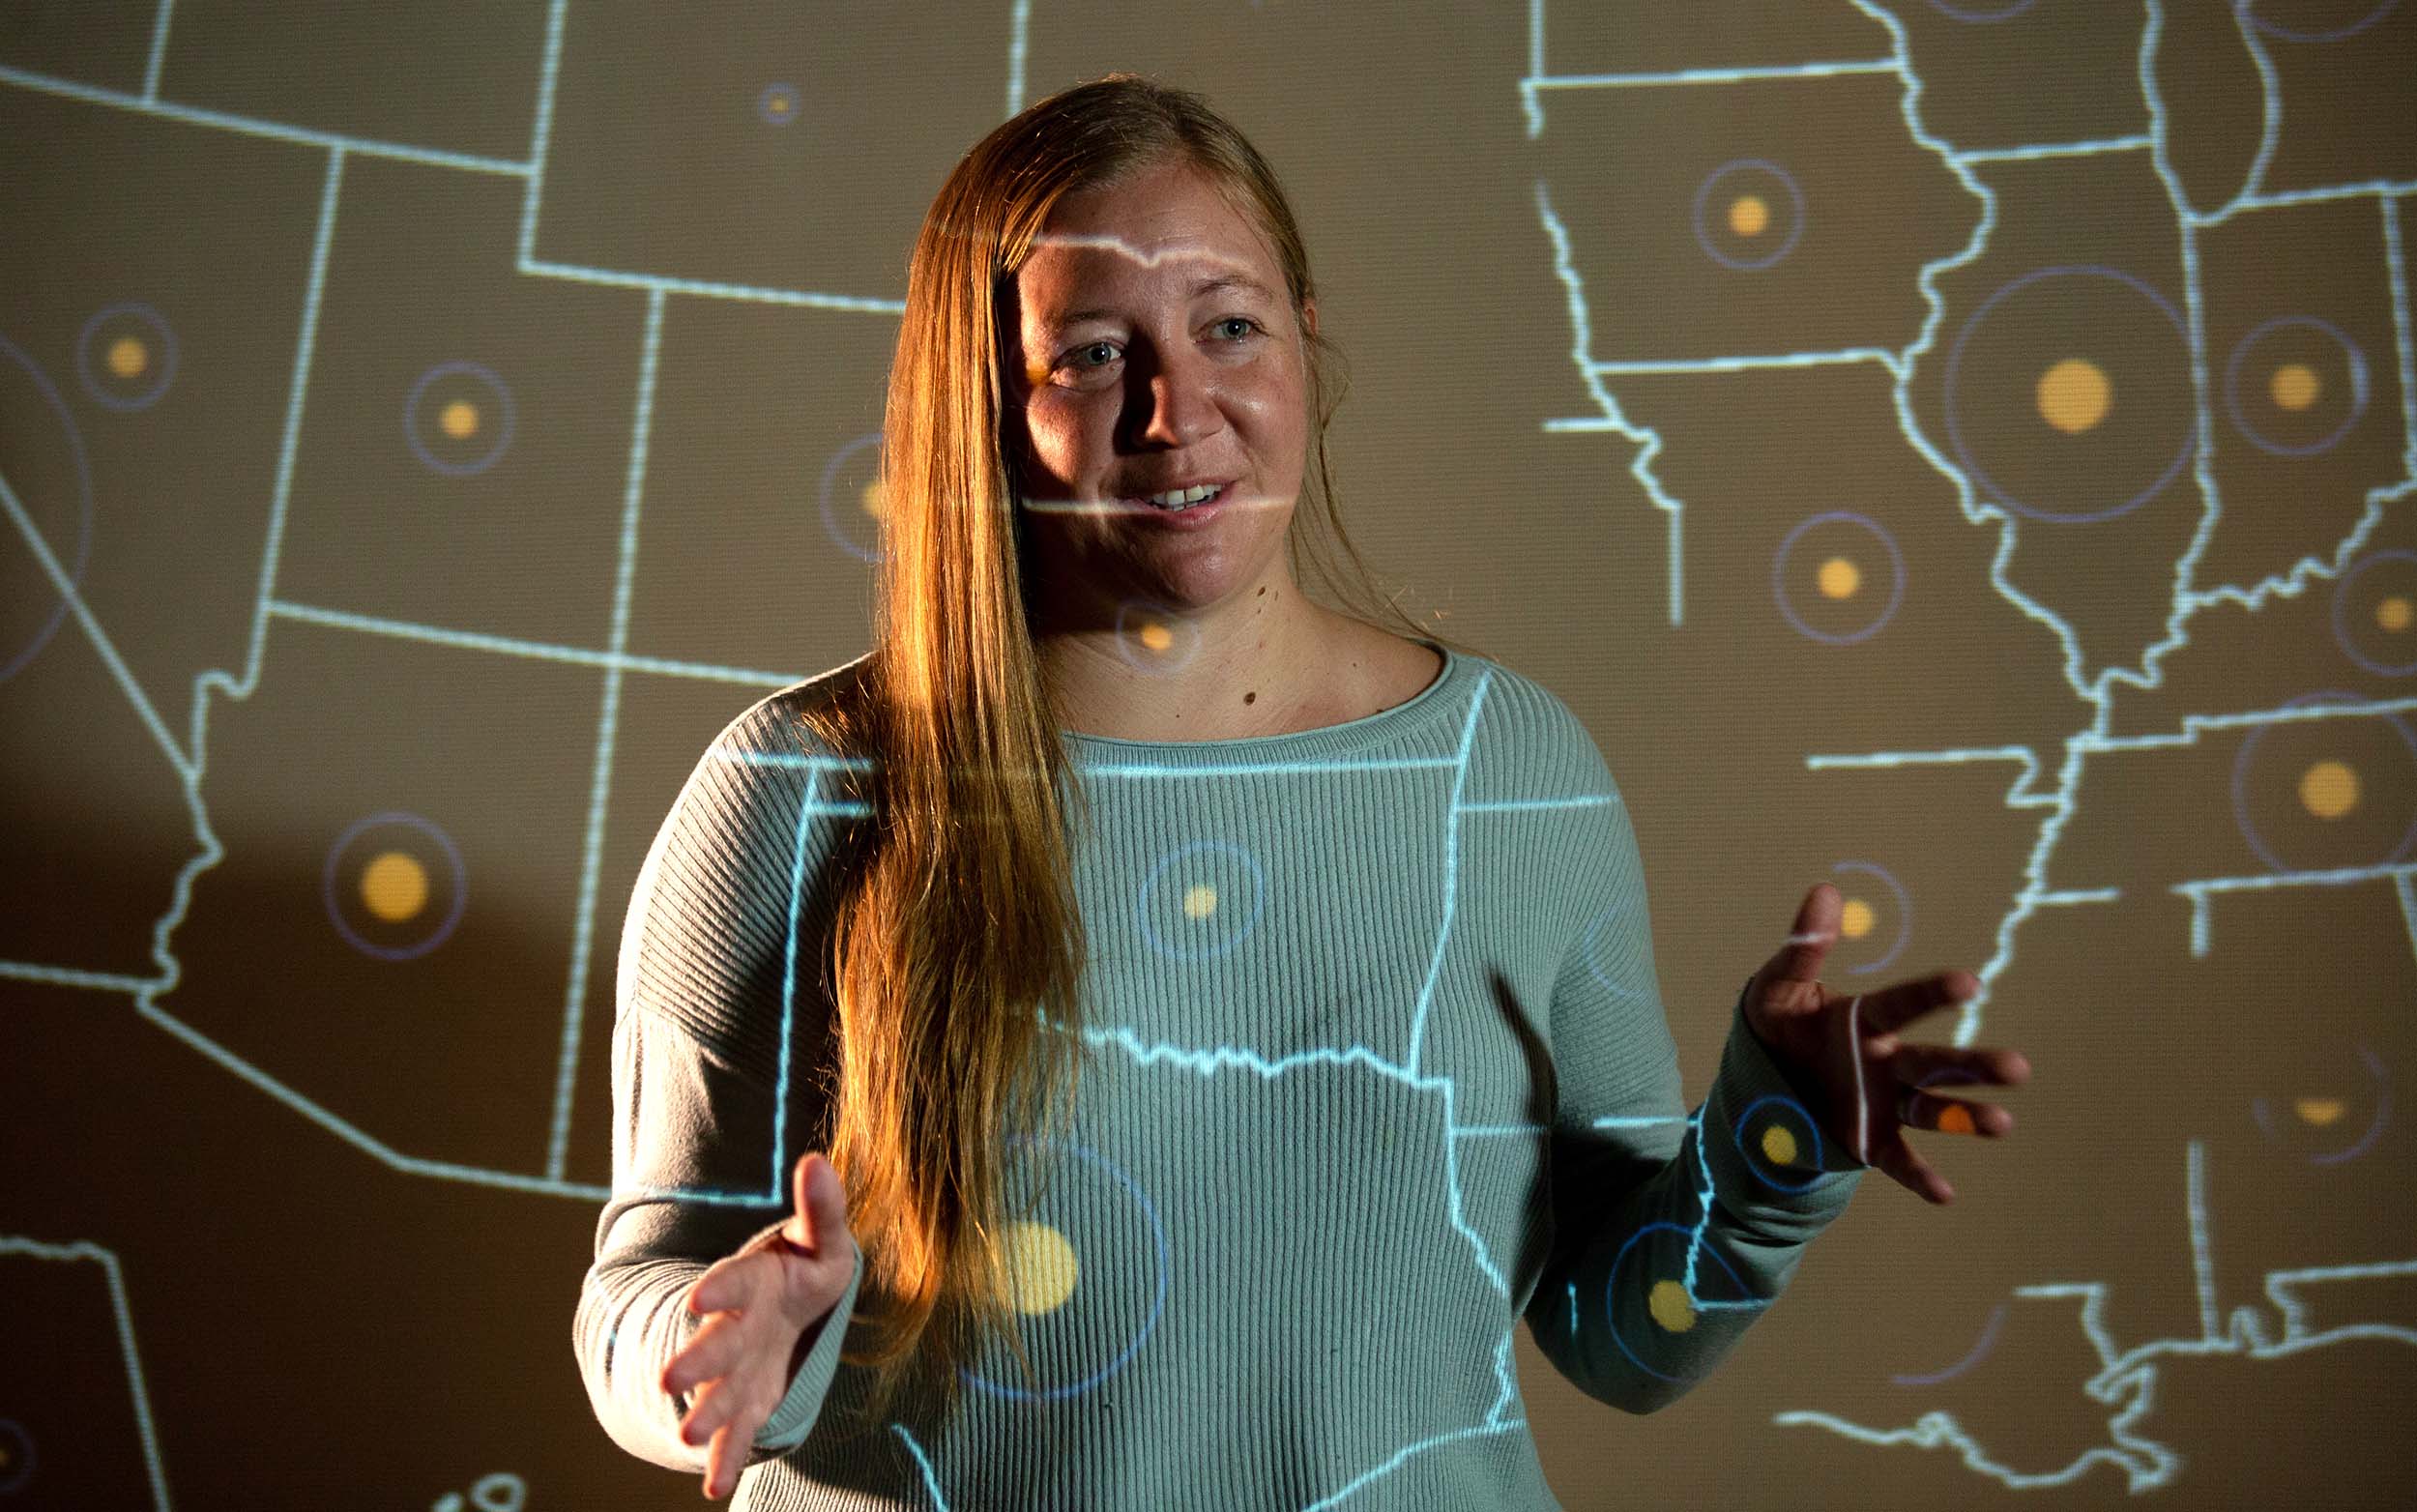 Colorado School of Mines student working with a digital map of the United States